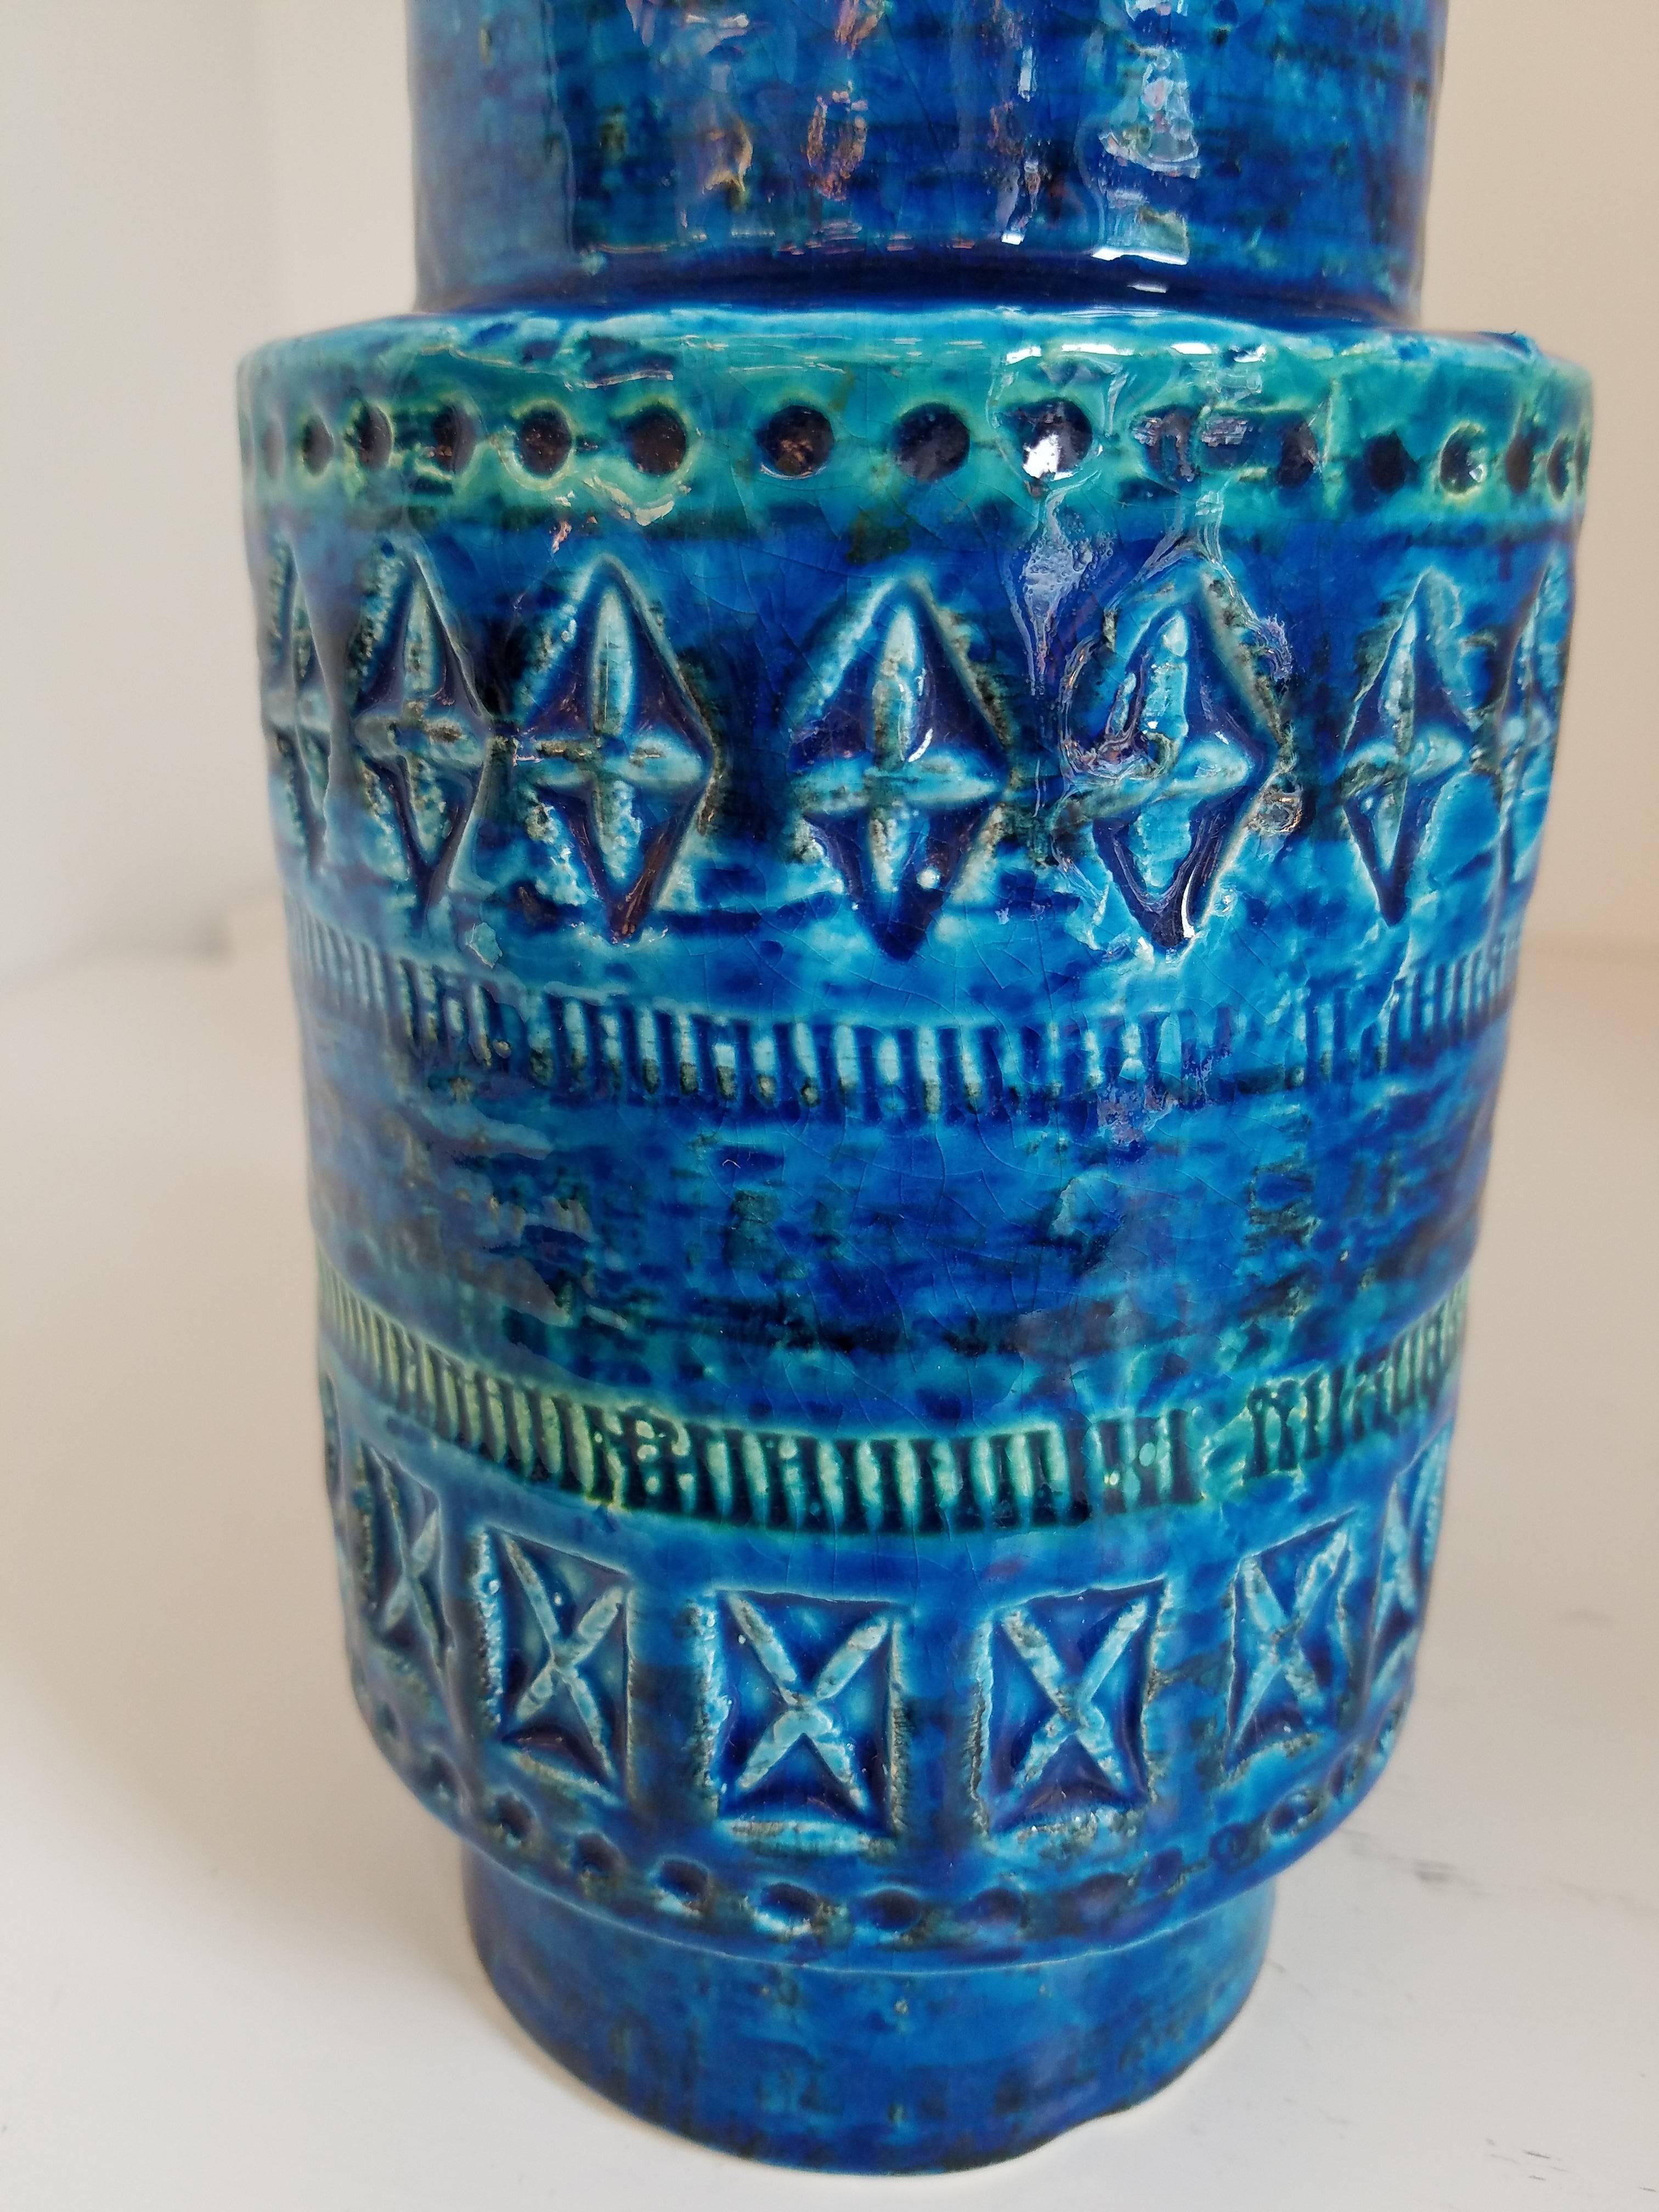 Rimini blue, blue glazed ceramic vase by Aldo Londi for Bitossi with hand-carved geometric designs and a vibrant turquoise and cobalt glaze. Made in Italy, circa 1960.

Measures: Vase diameter 4